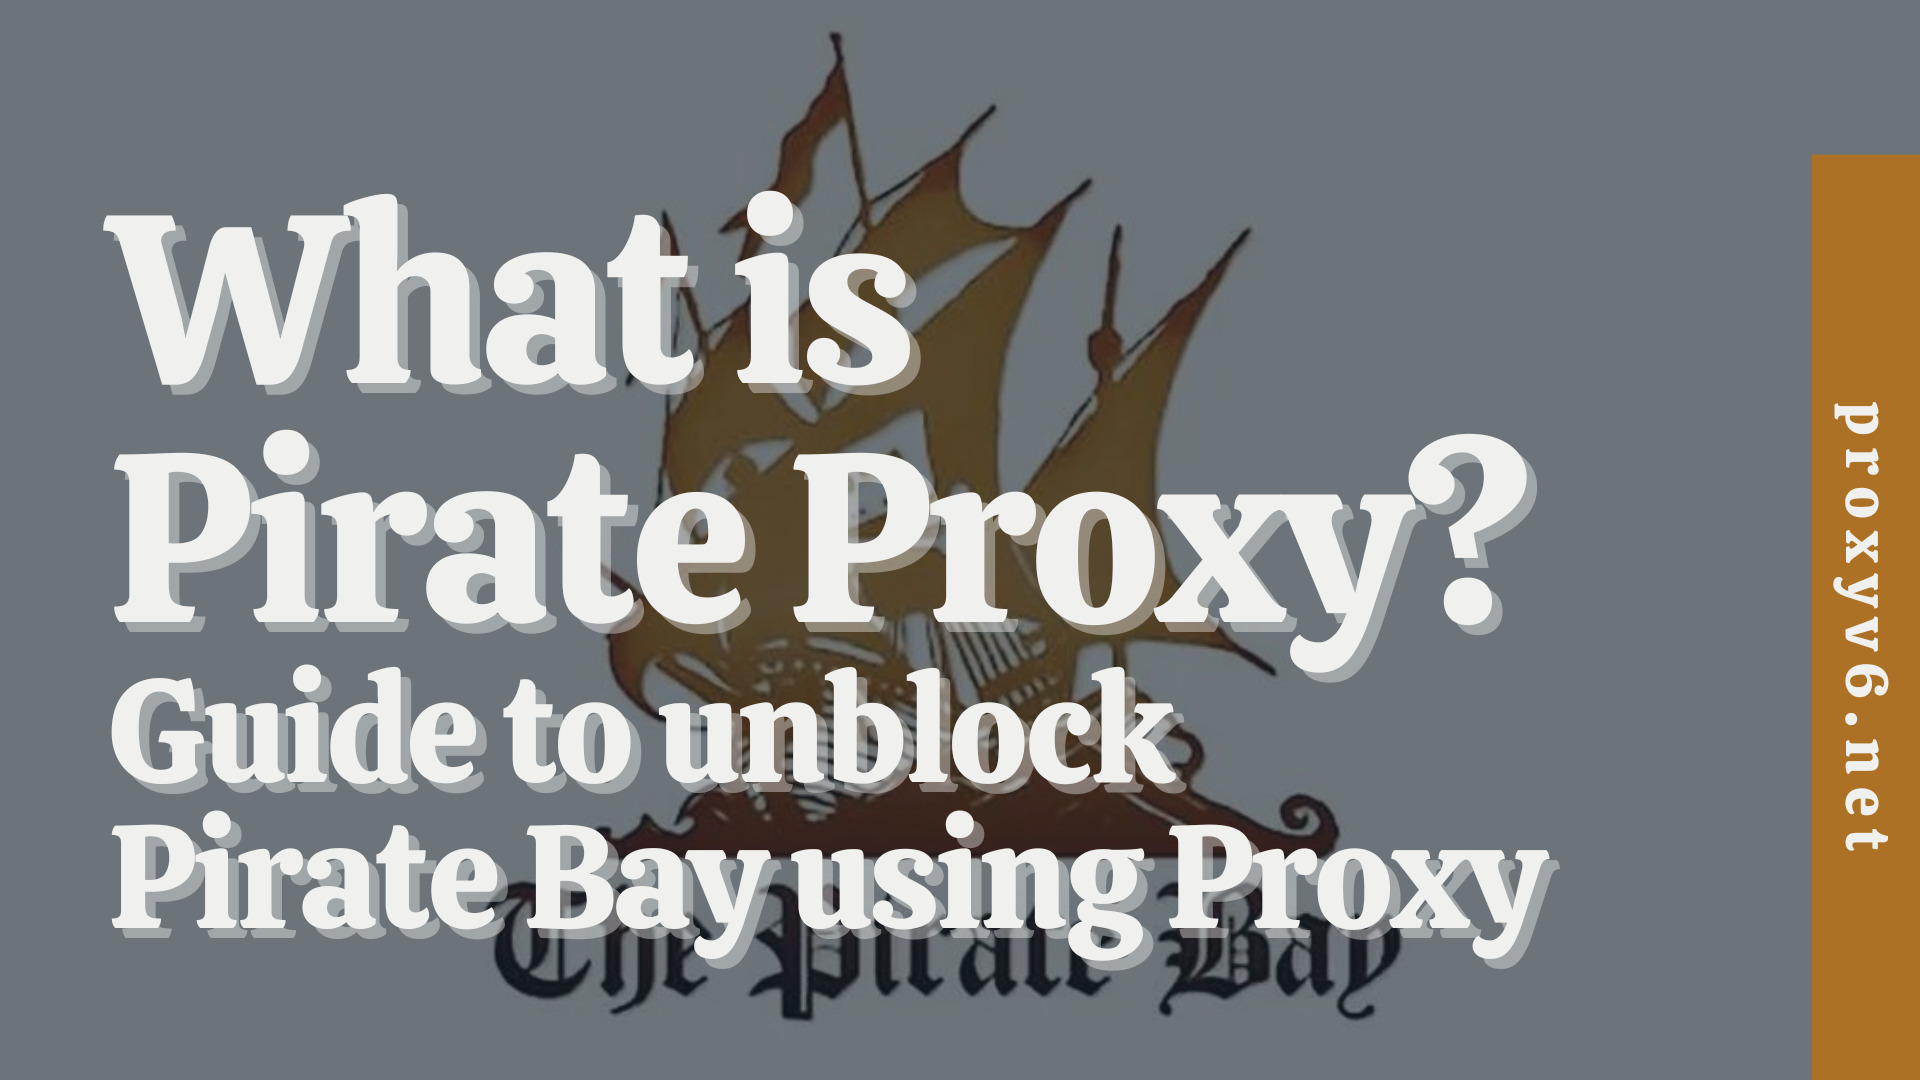 What is Pirate Proxy? Guide to unblock Pirate Bay using Proxy